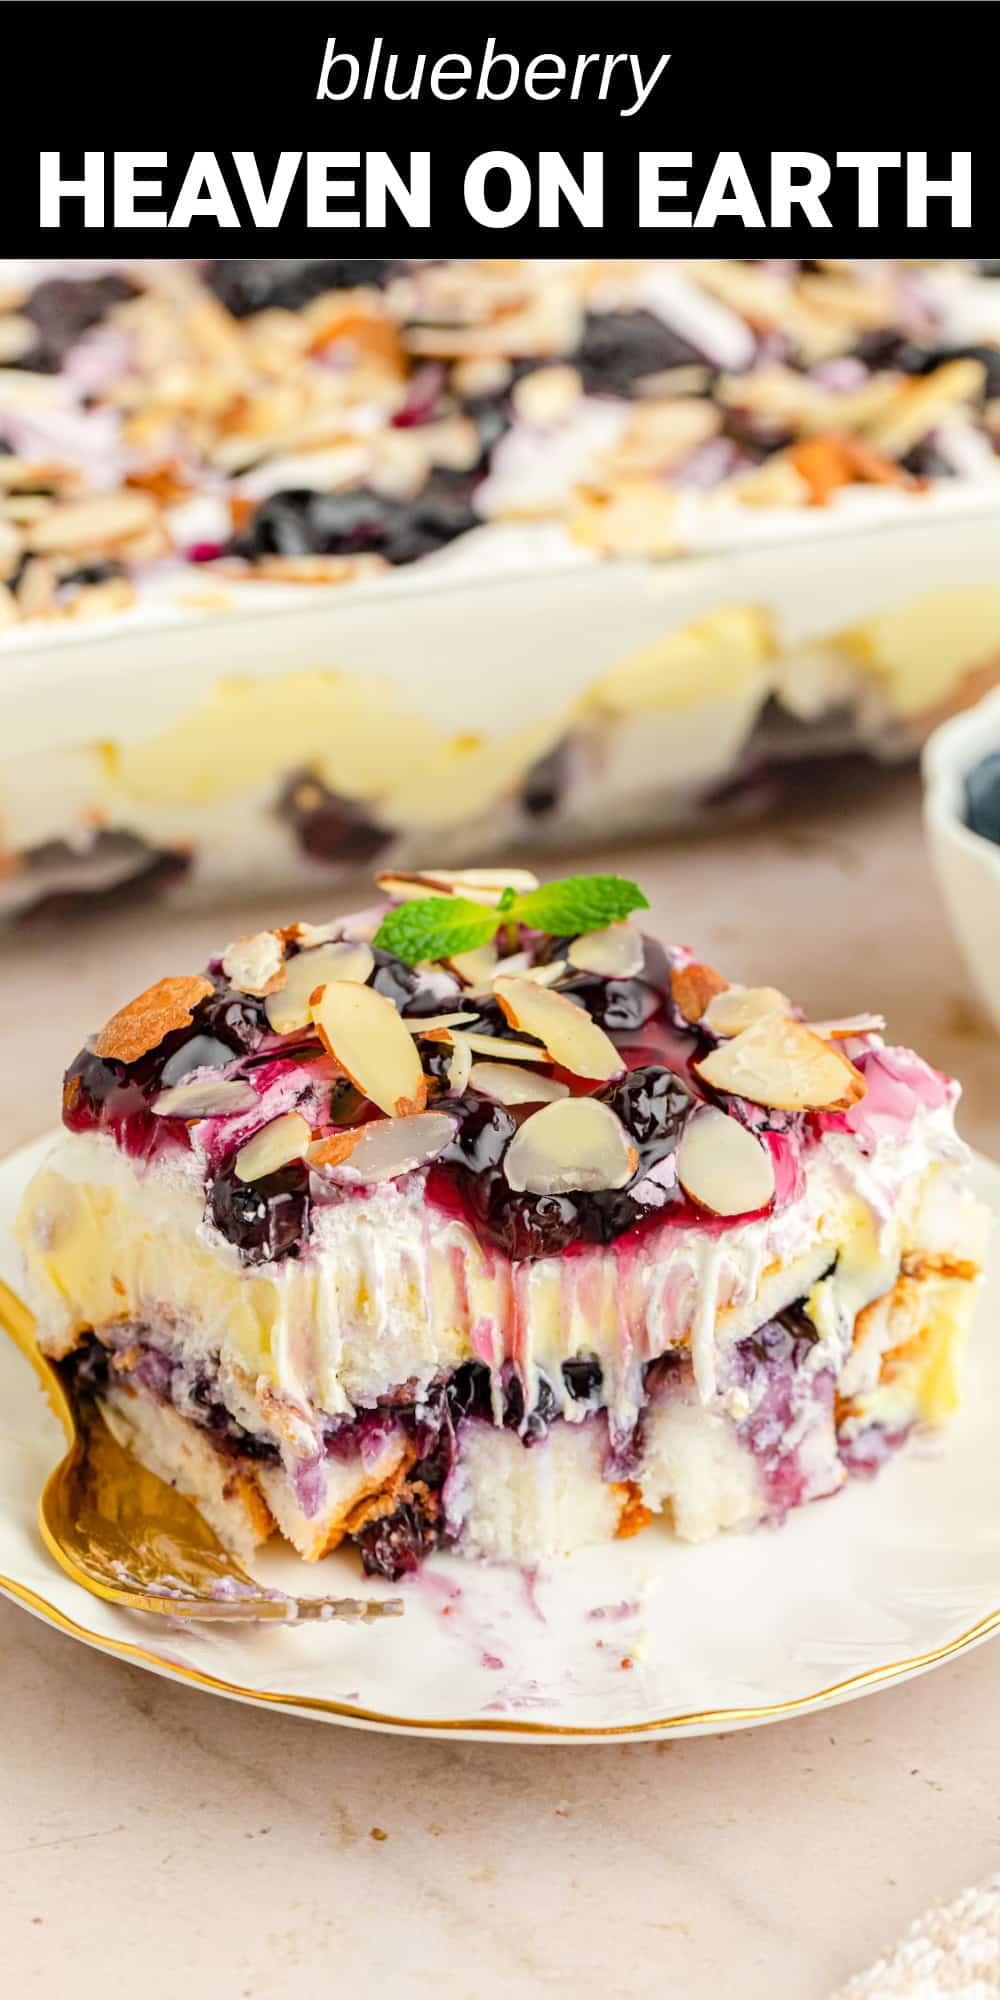 This amazing Blueberry Heaven on Earth Cake is so easy to make, featuring pieces of pre-made angel food cake, layered with sweet vanilla pudding, blueberry pie filling, and fluffy whipped topping. It's an incredibly light, creamy, and sweet dessert that's perfect for any occasion.